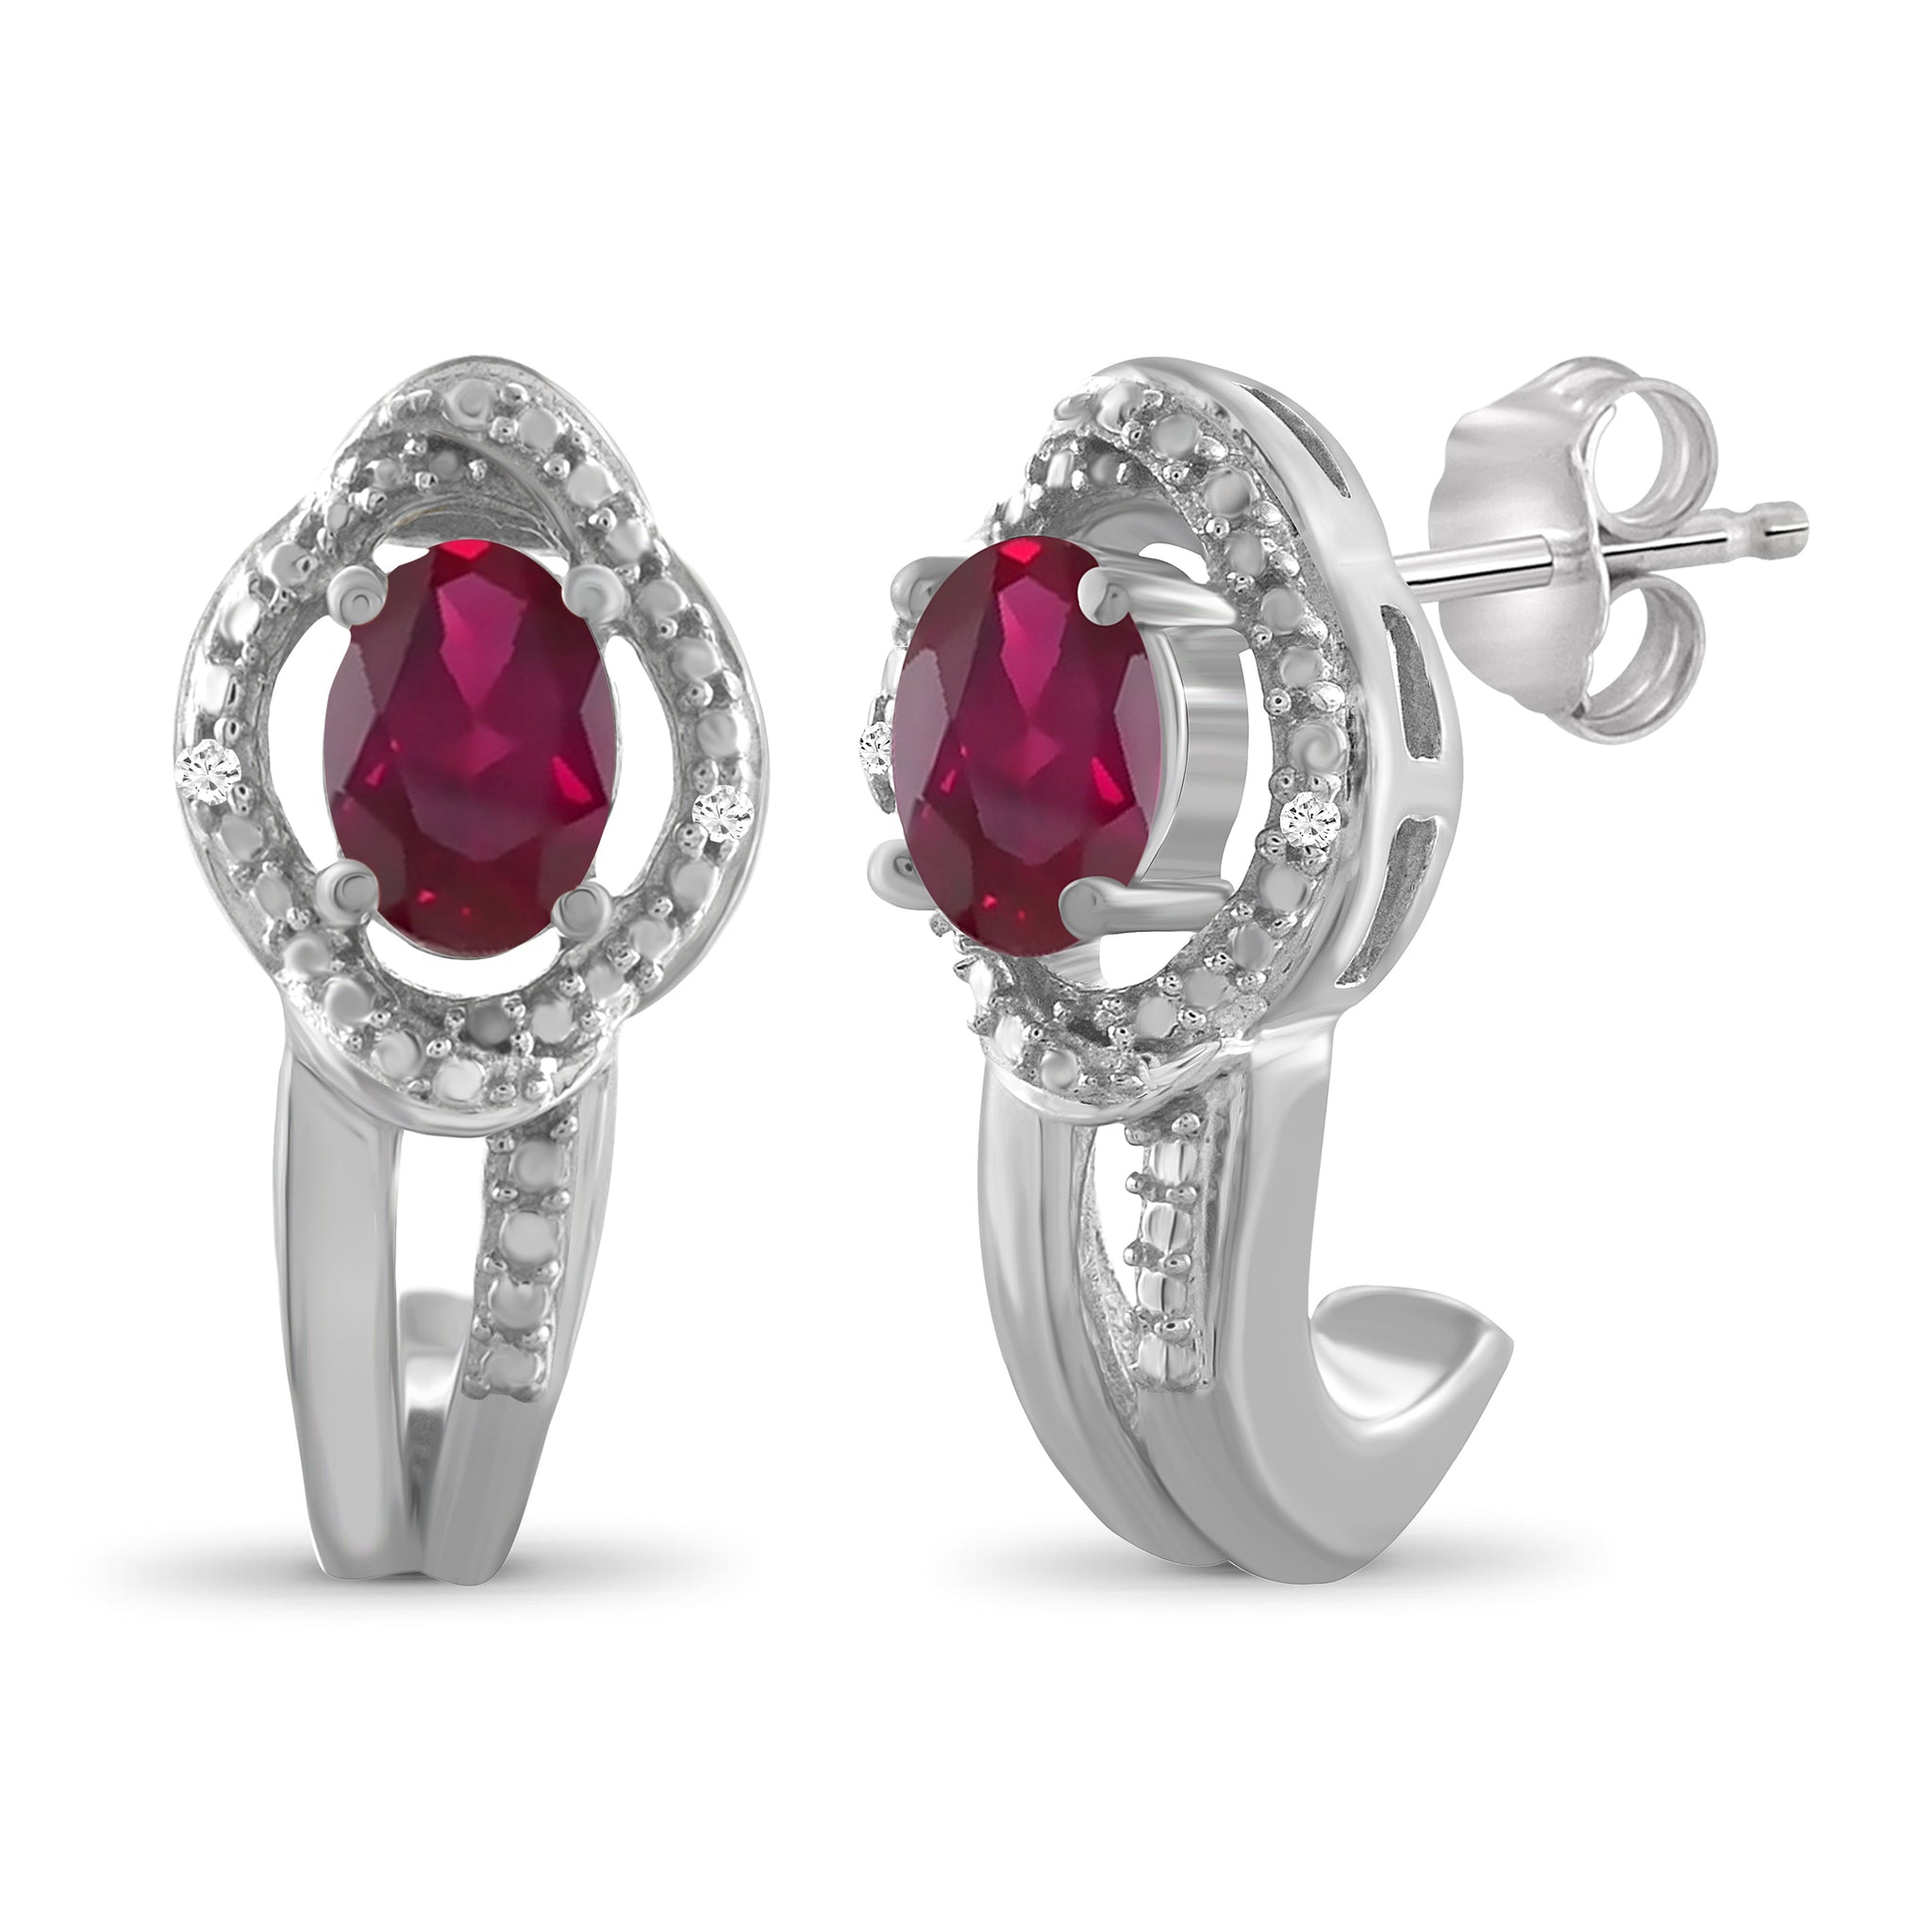 JewelonFire 0.95 Carat T.G.W. Ruby And Accent White Diamond Sterling Silver J Hoop Earrings - Assorted Colors